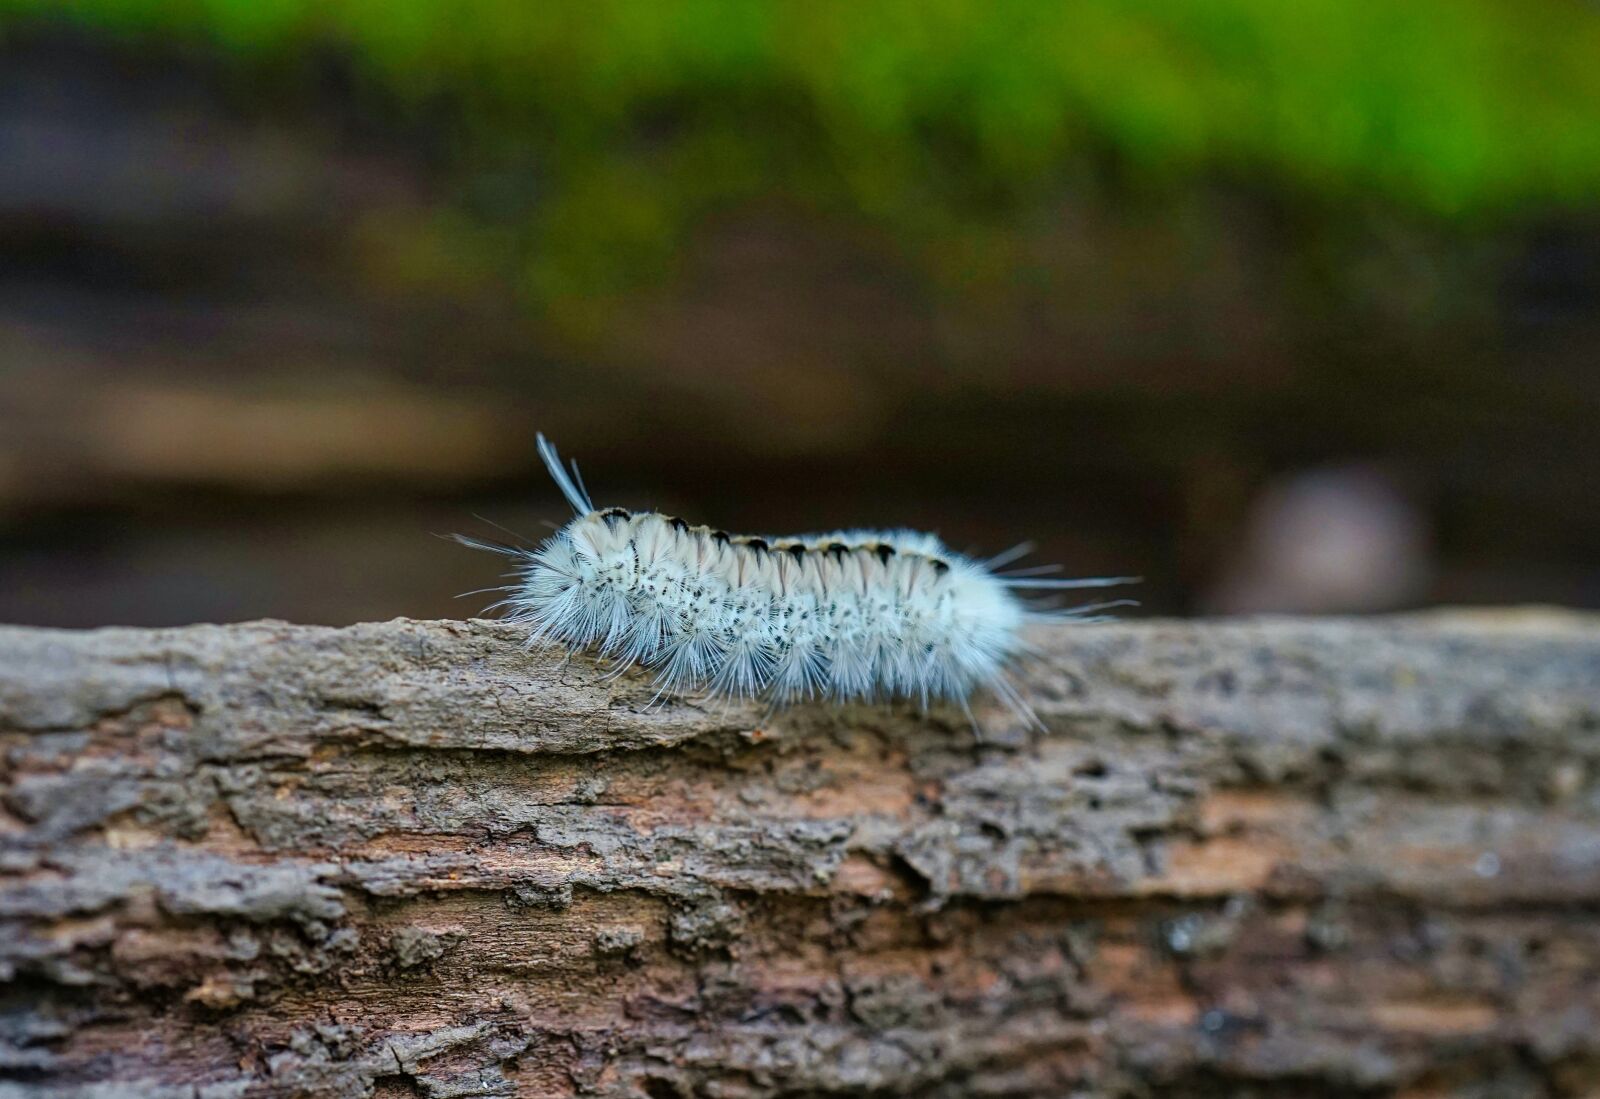 Sony a7 II sample photo. Caterpillar, white caterpillar, insect photography